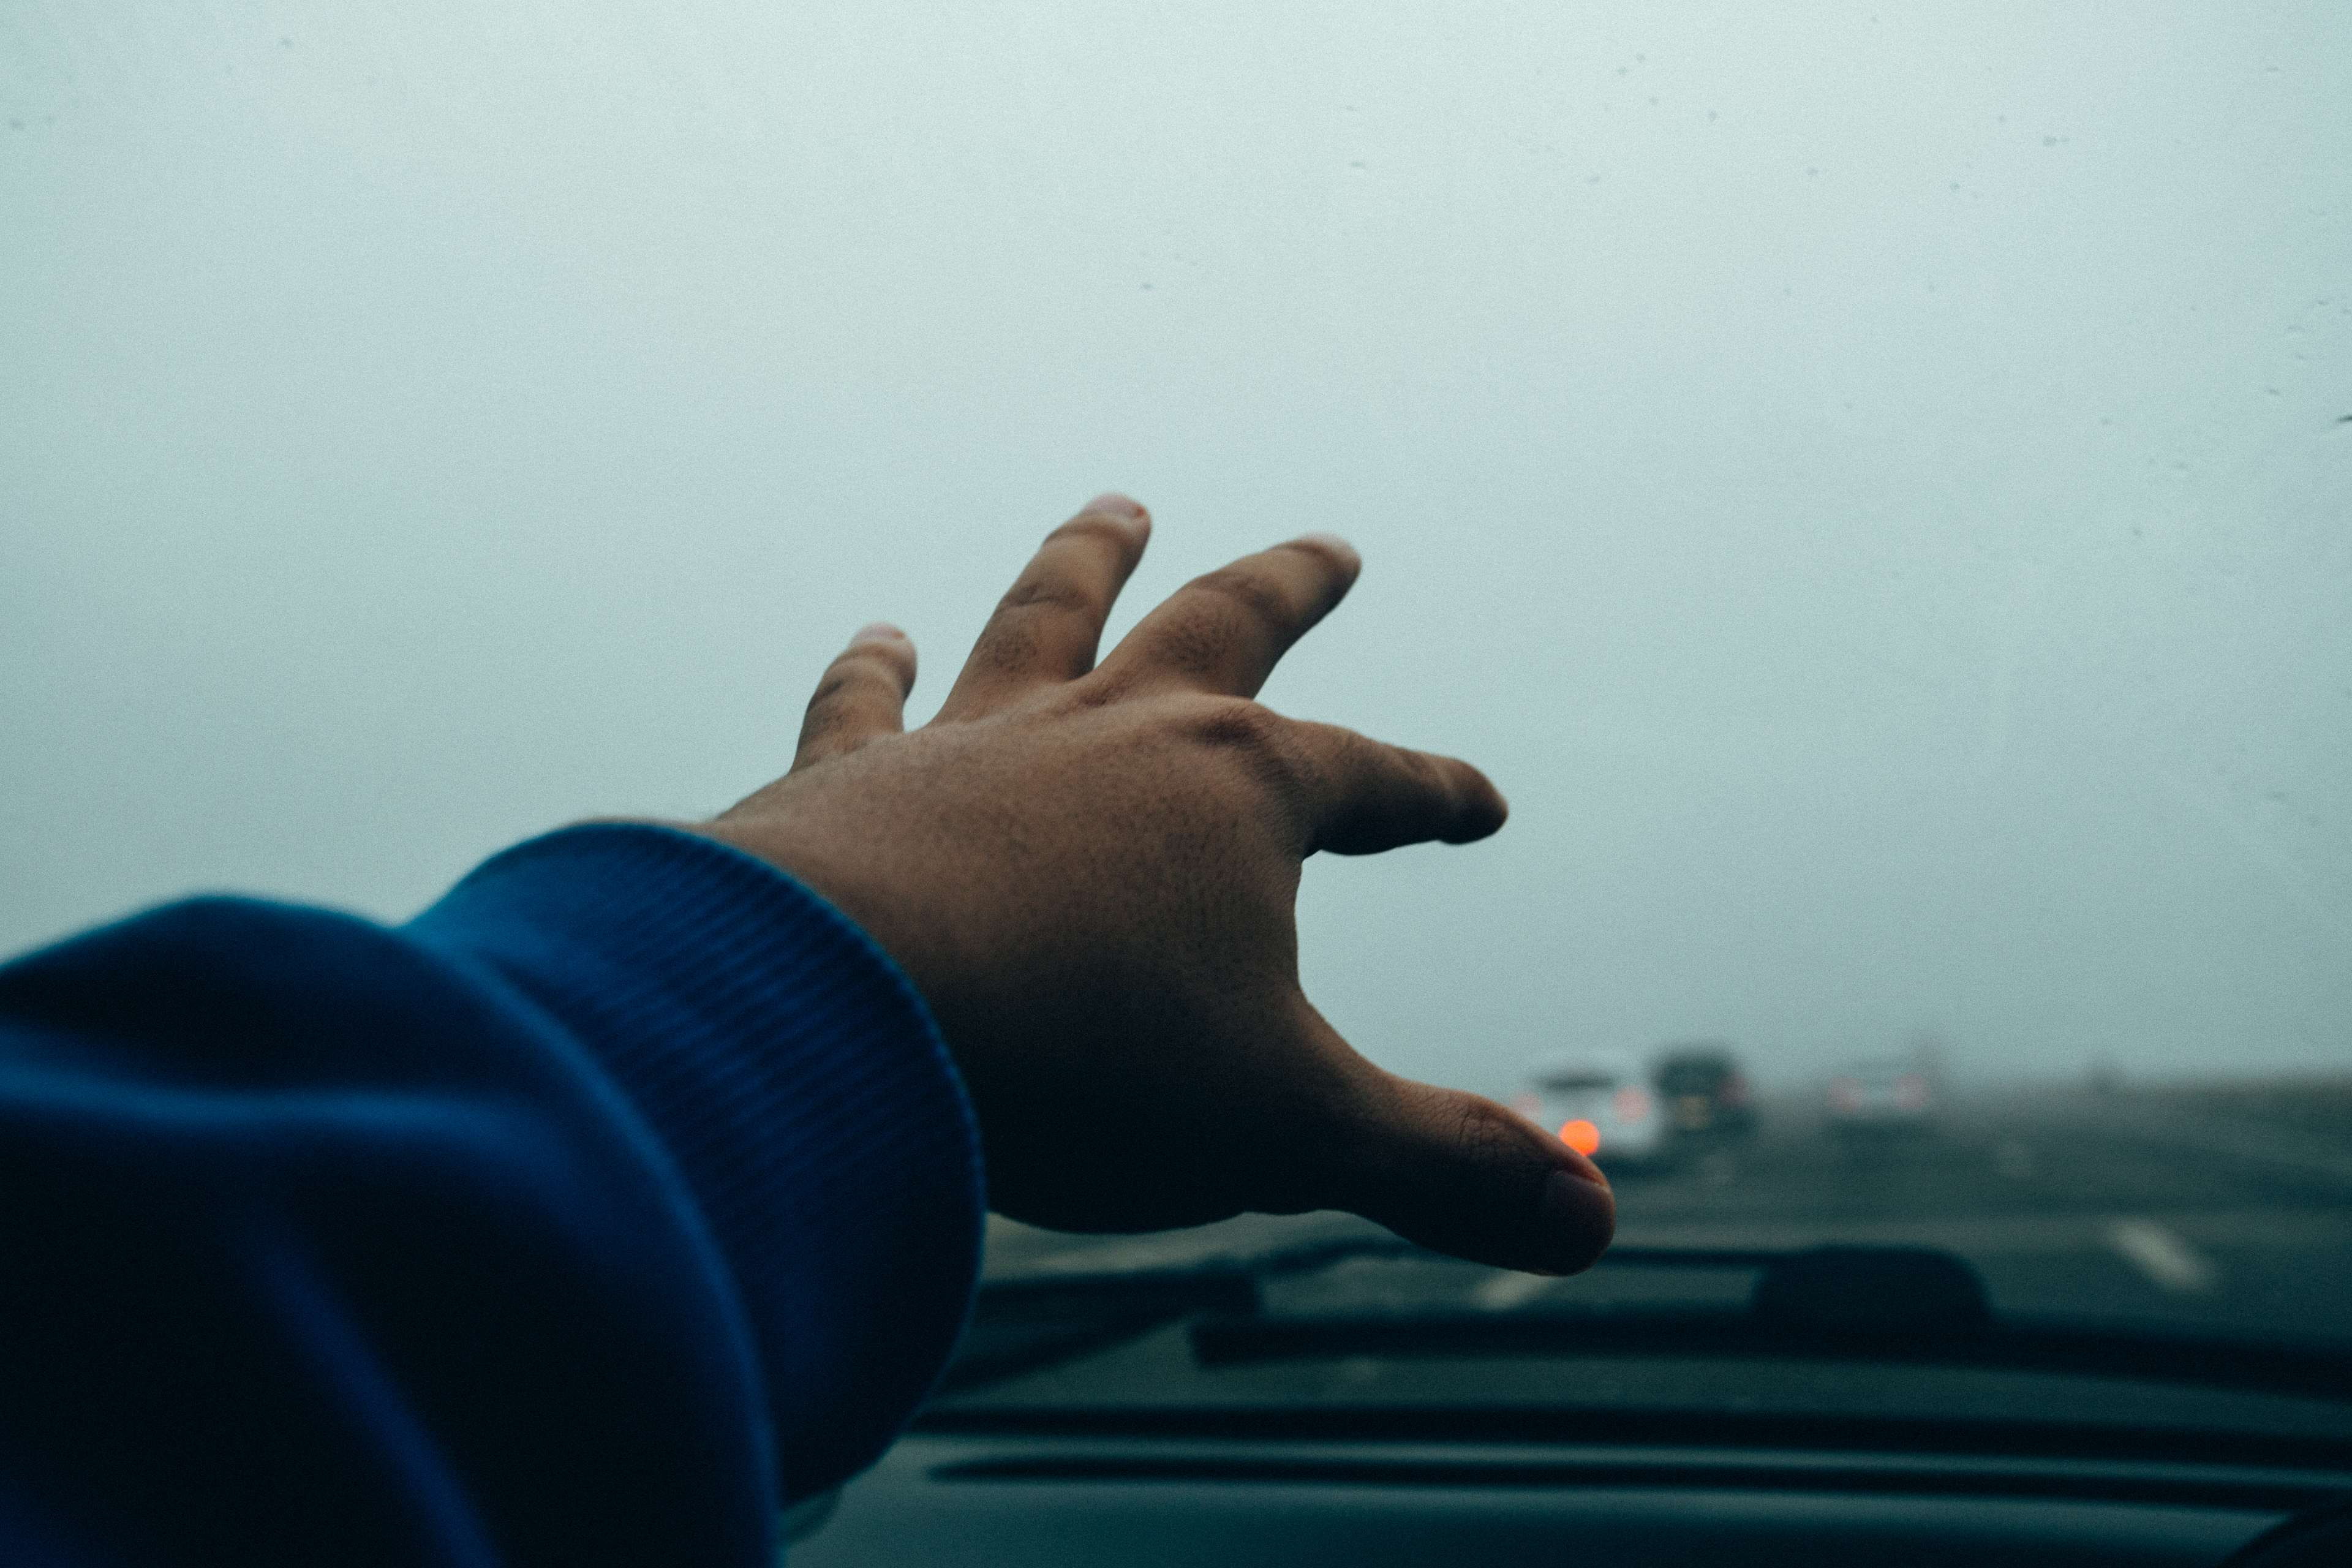 action, adult, blur, cars, conceptual, hand, highway, light